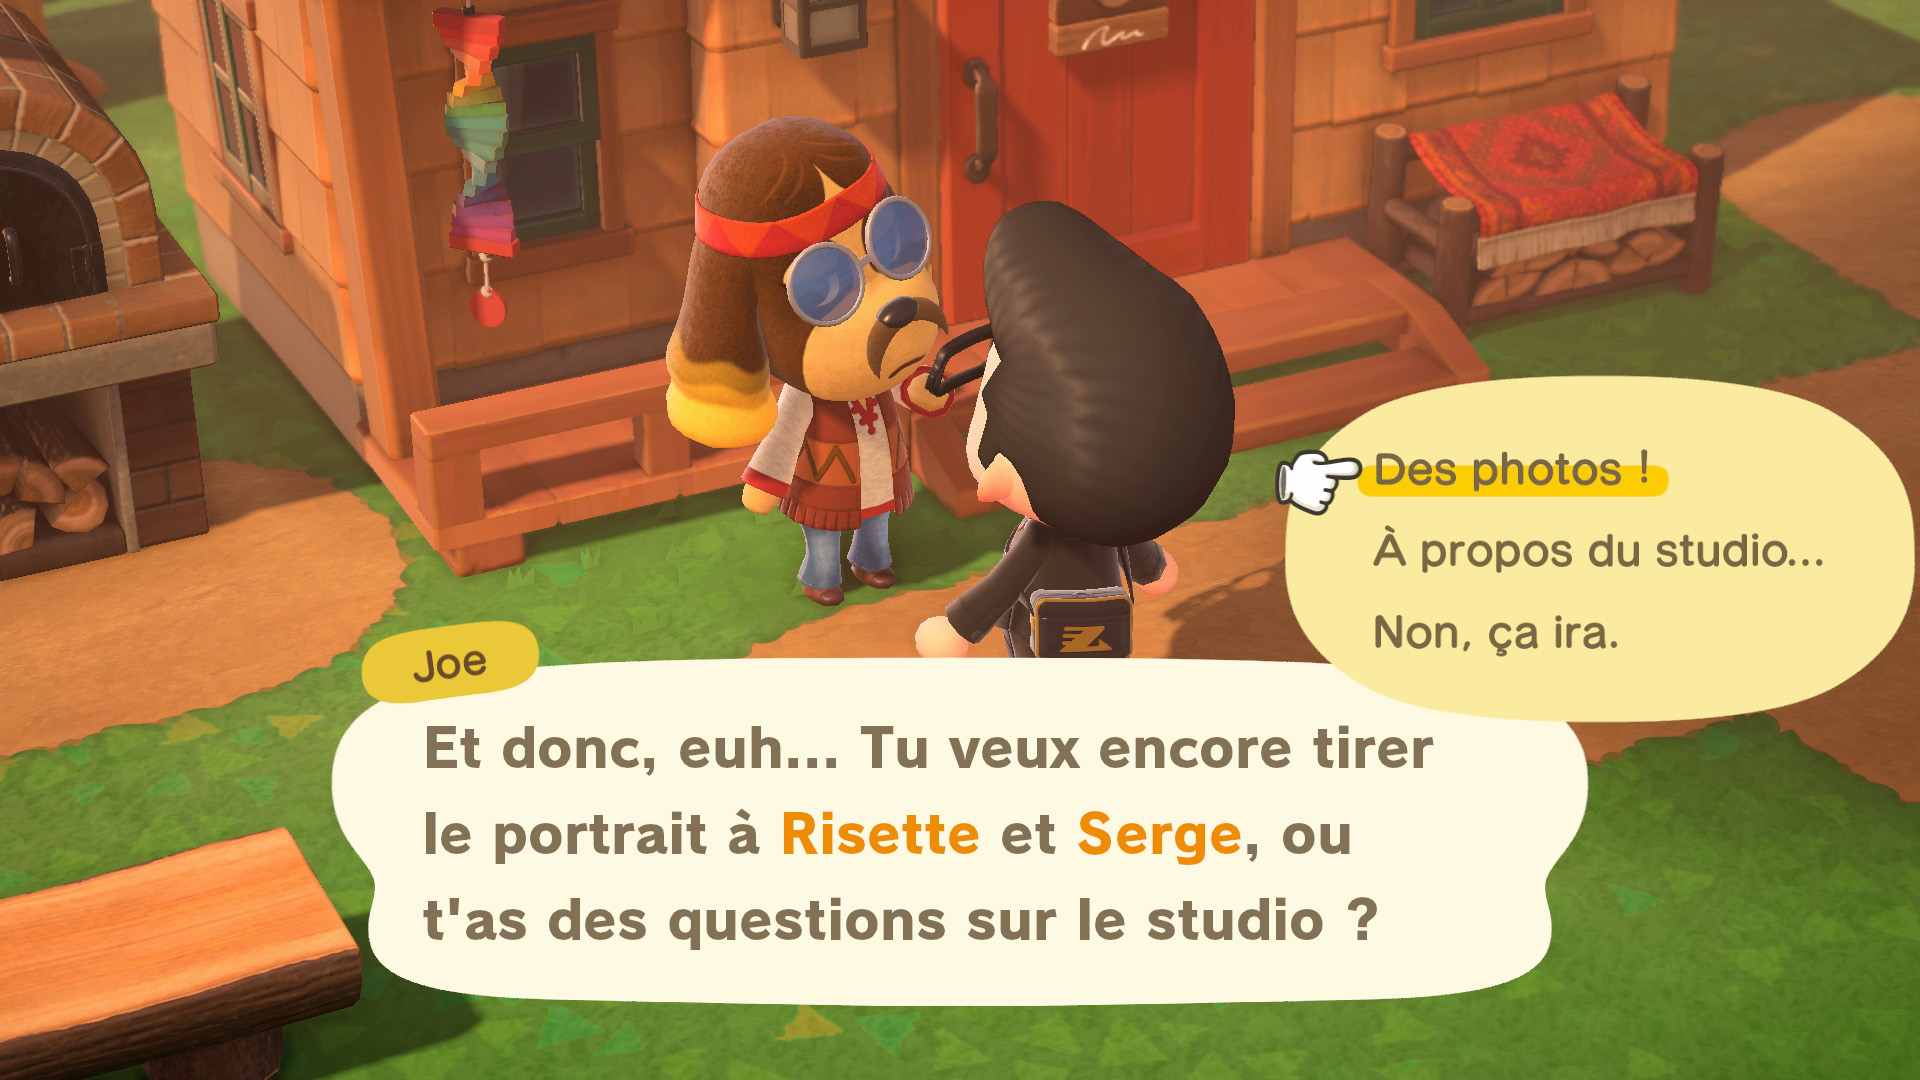 Saison des mariages - animal crossing new horizons